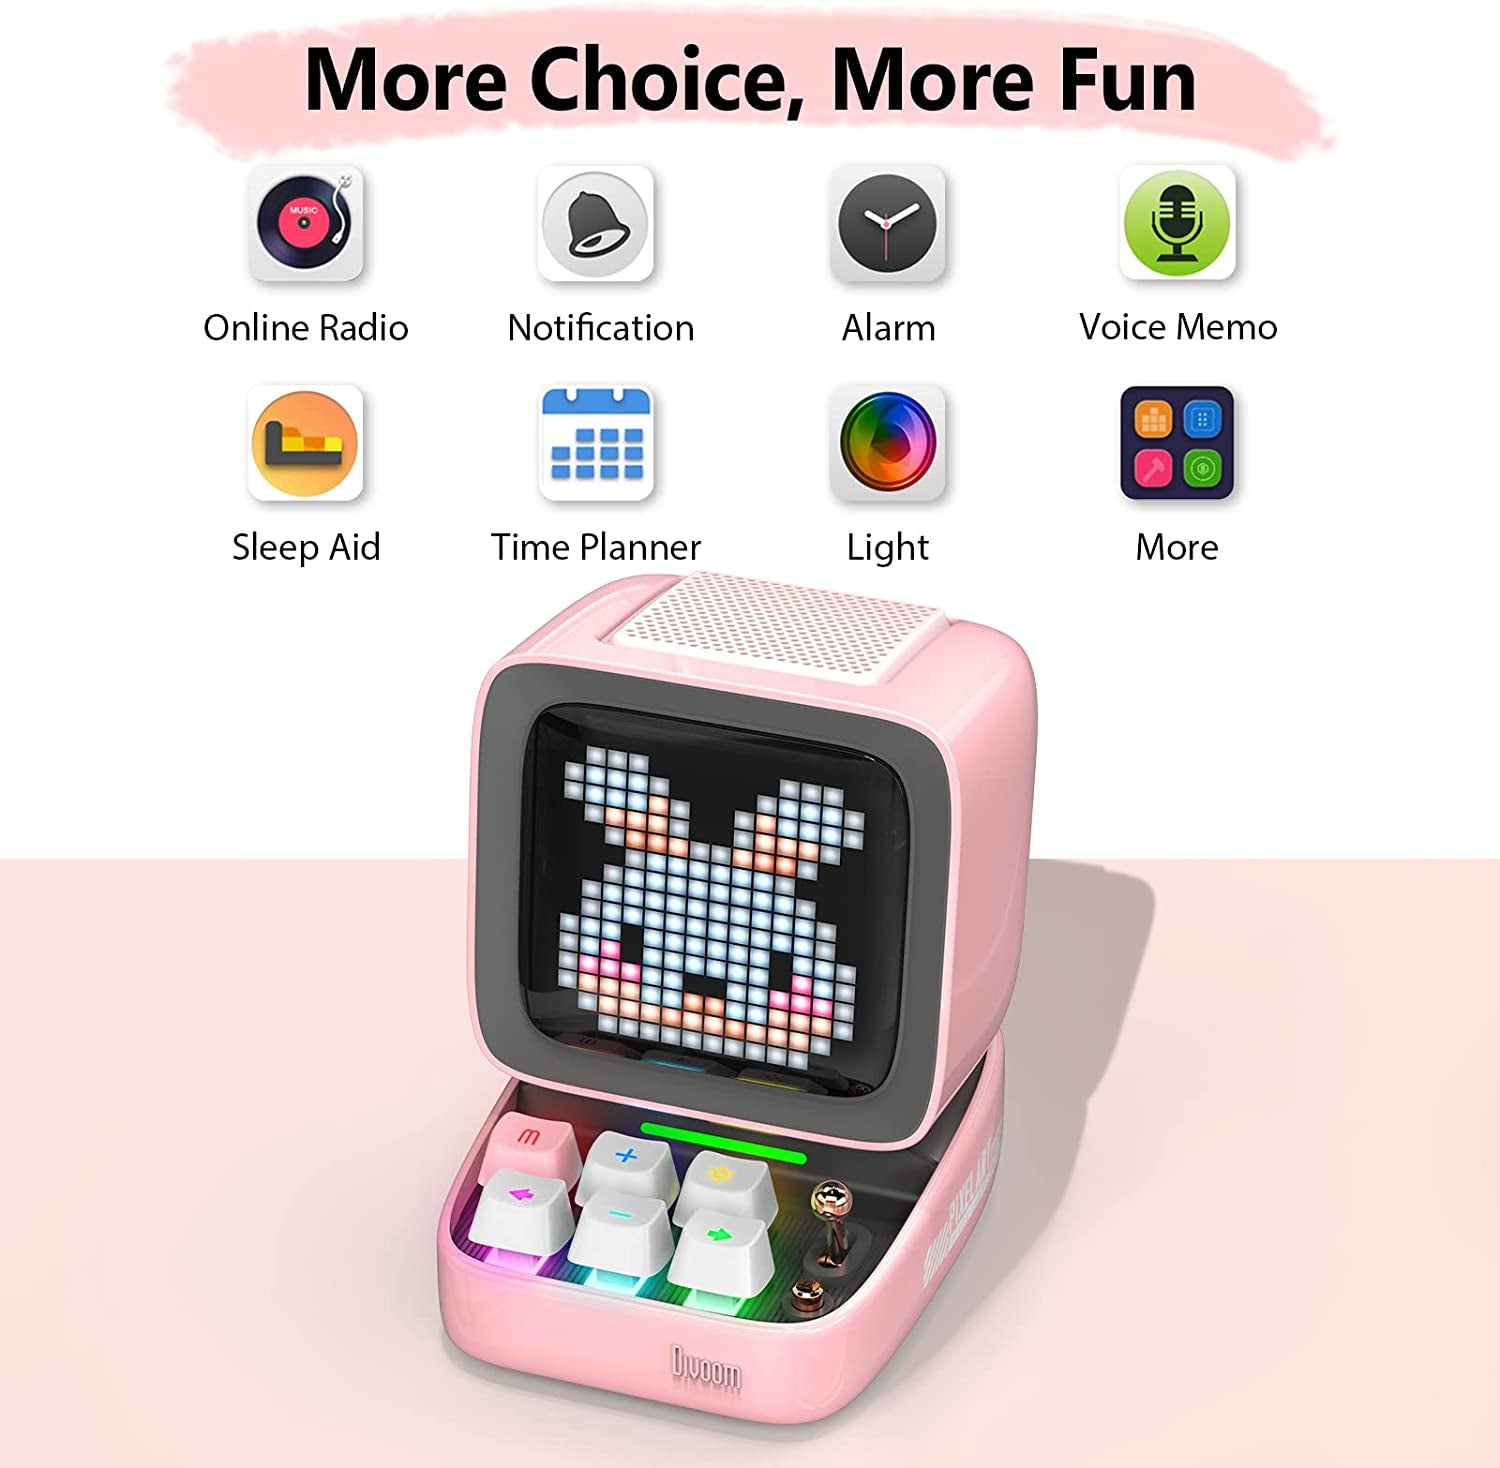 Ditoo Retro Pixel Art Game Bluetooth Speaker with 16X16 LED App Controlled Front Screen (Pink)